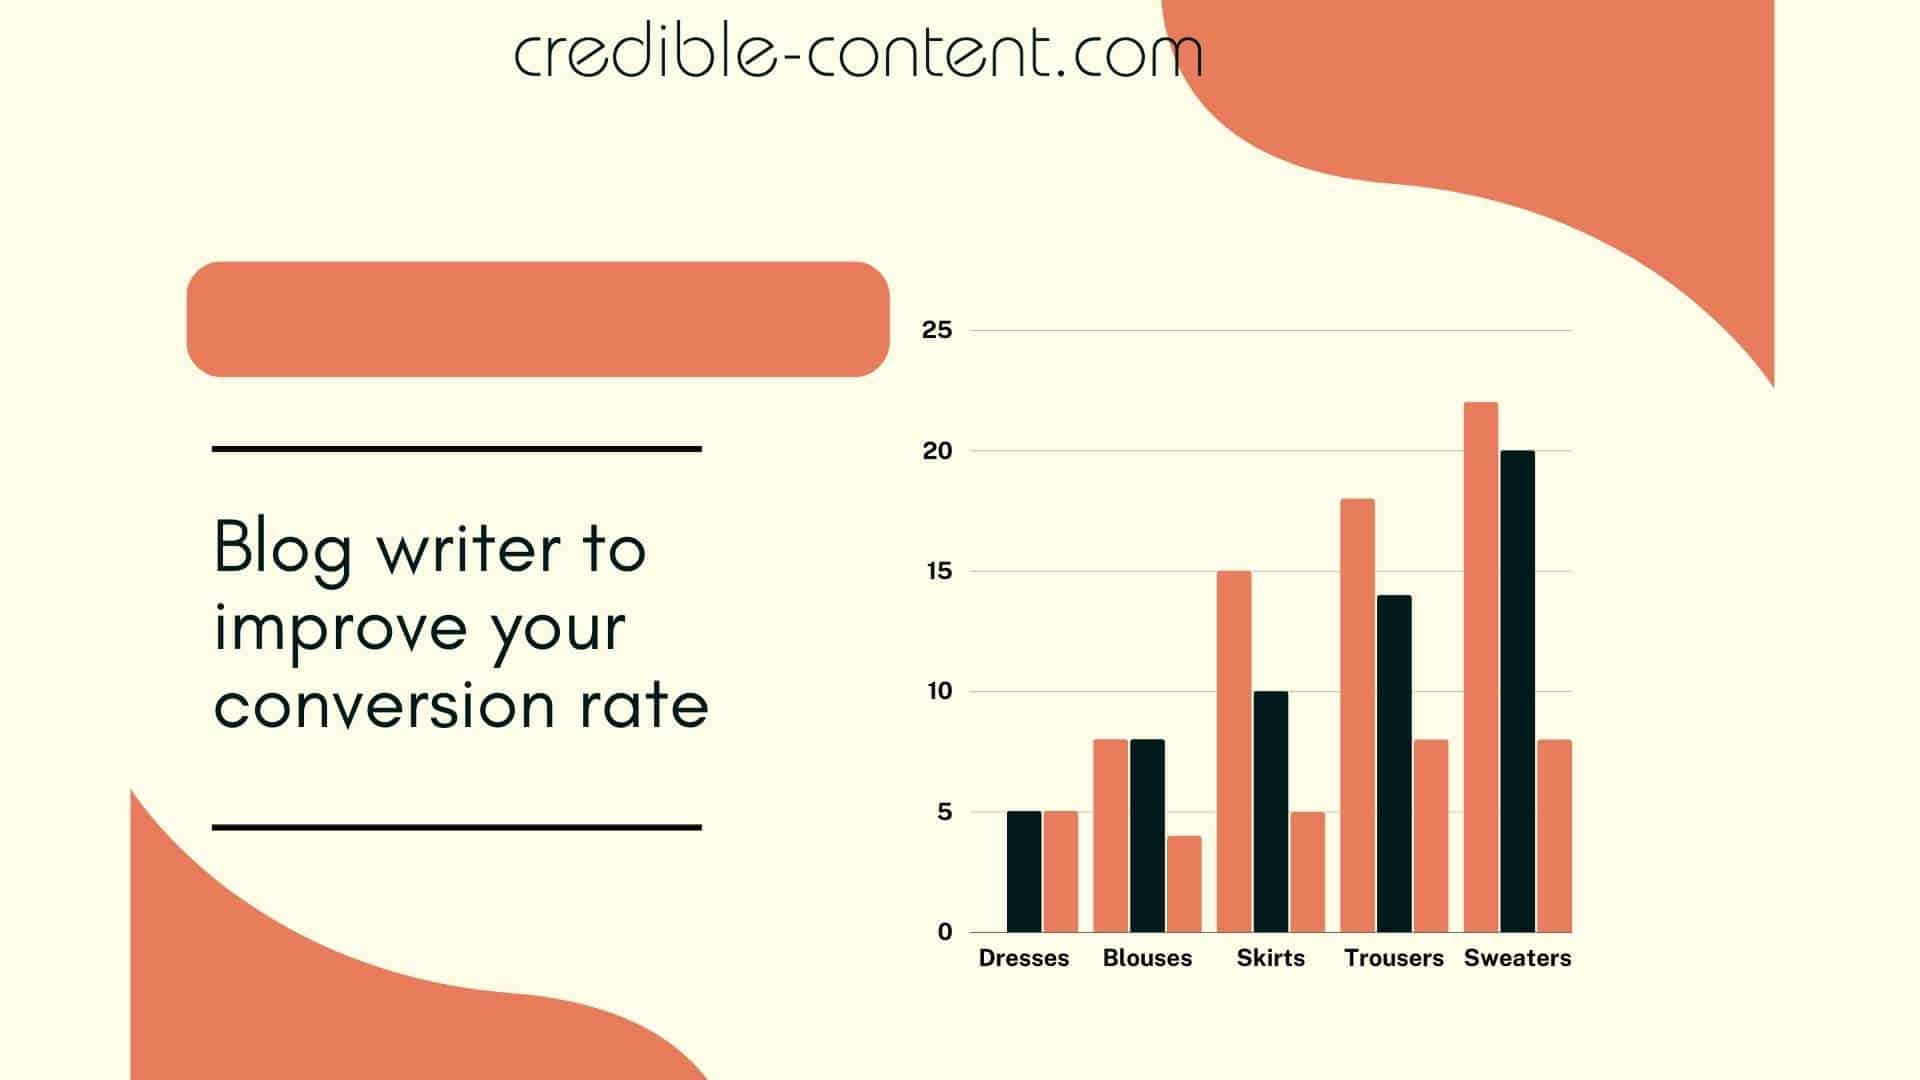 Blog writer to improve your conversion rate